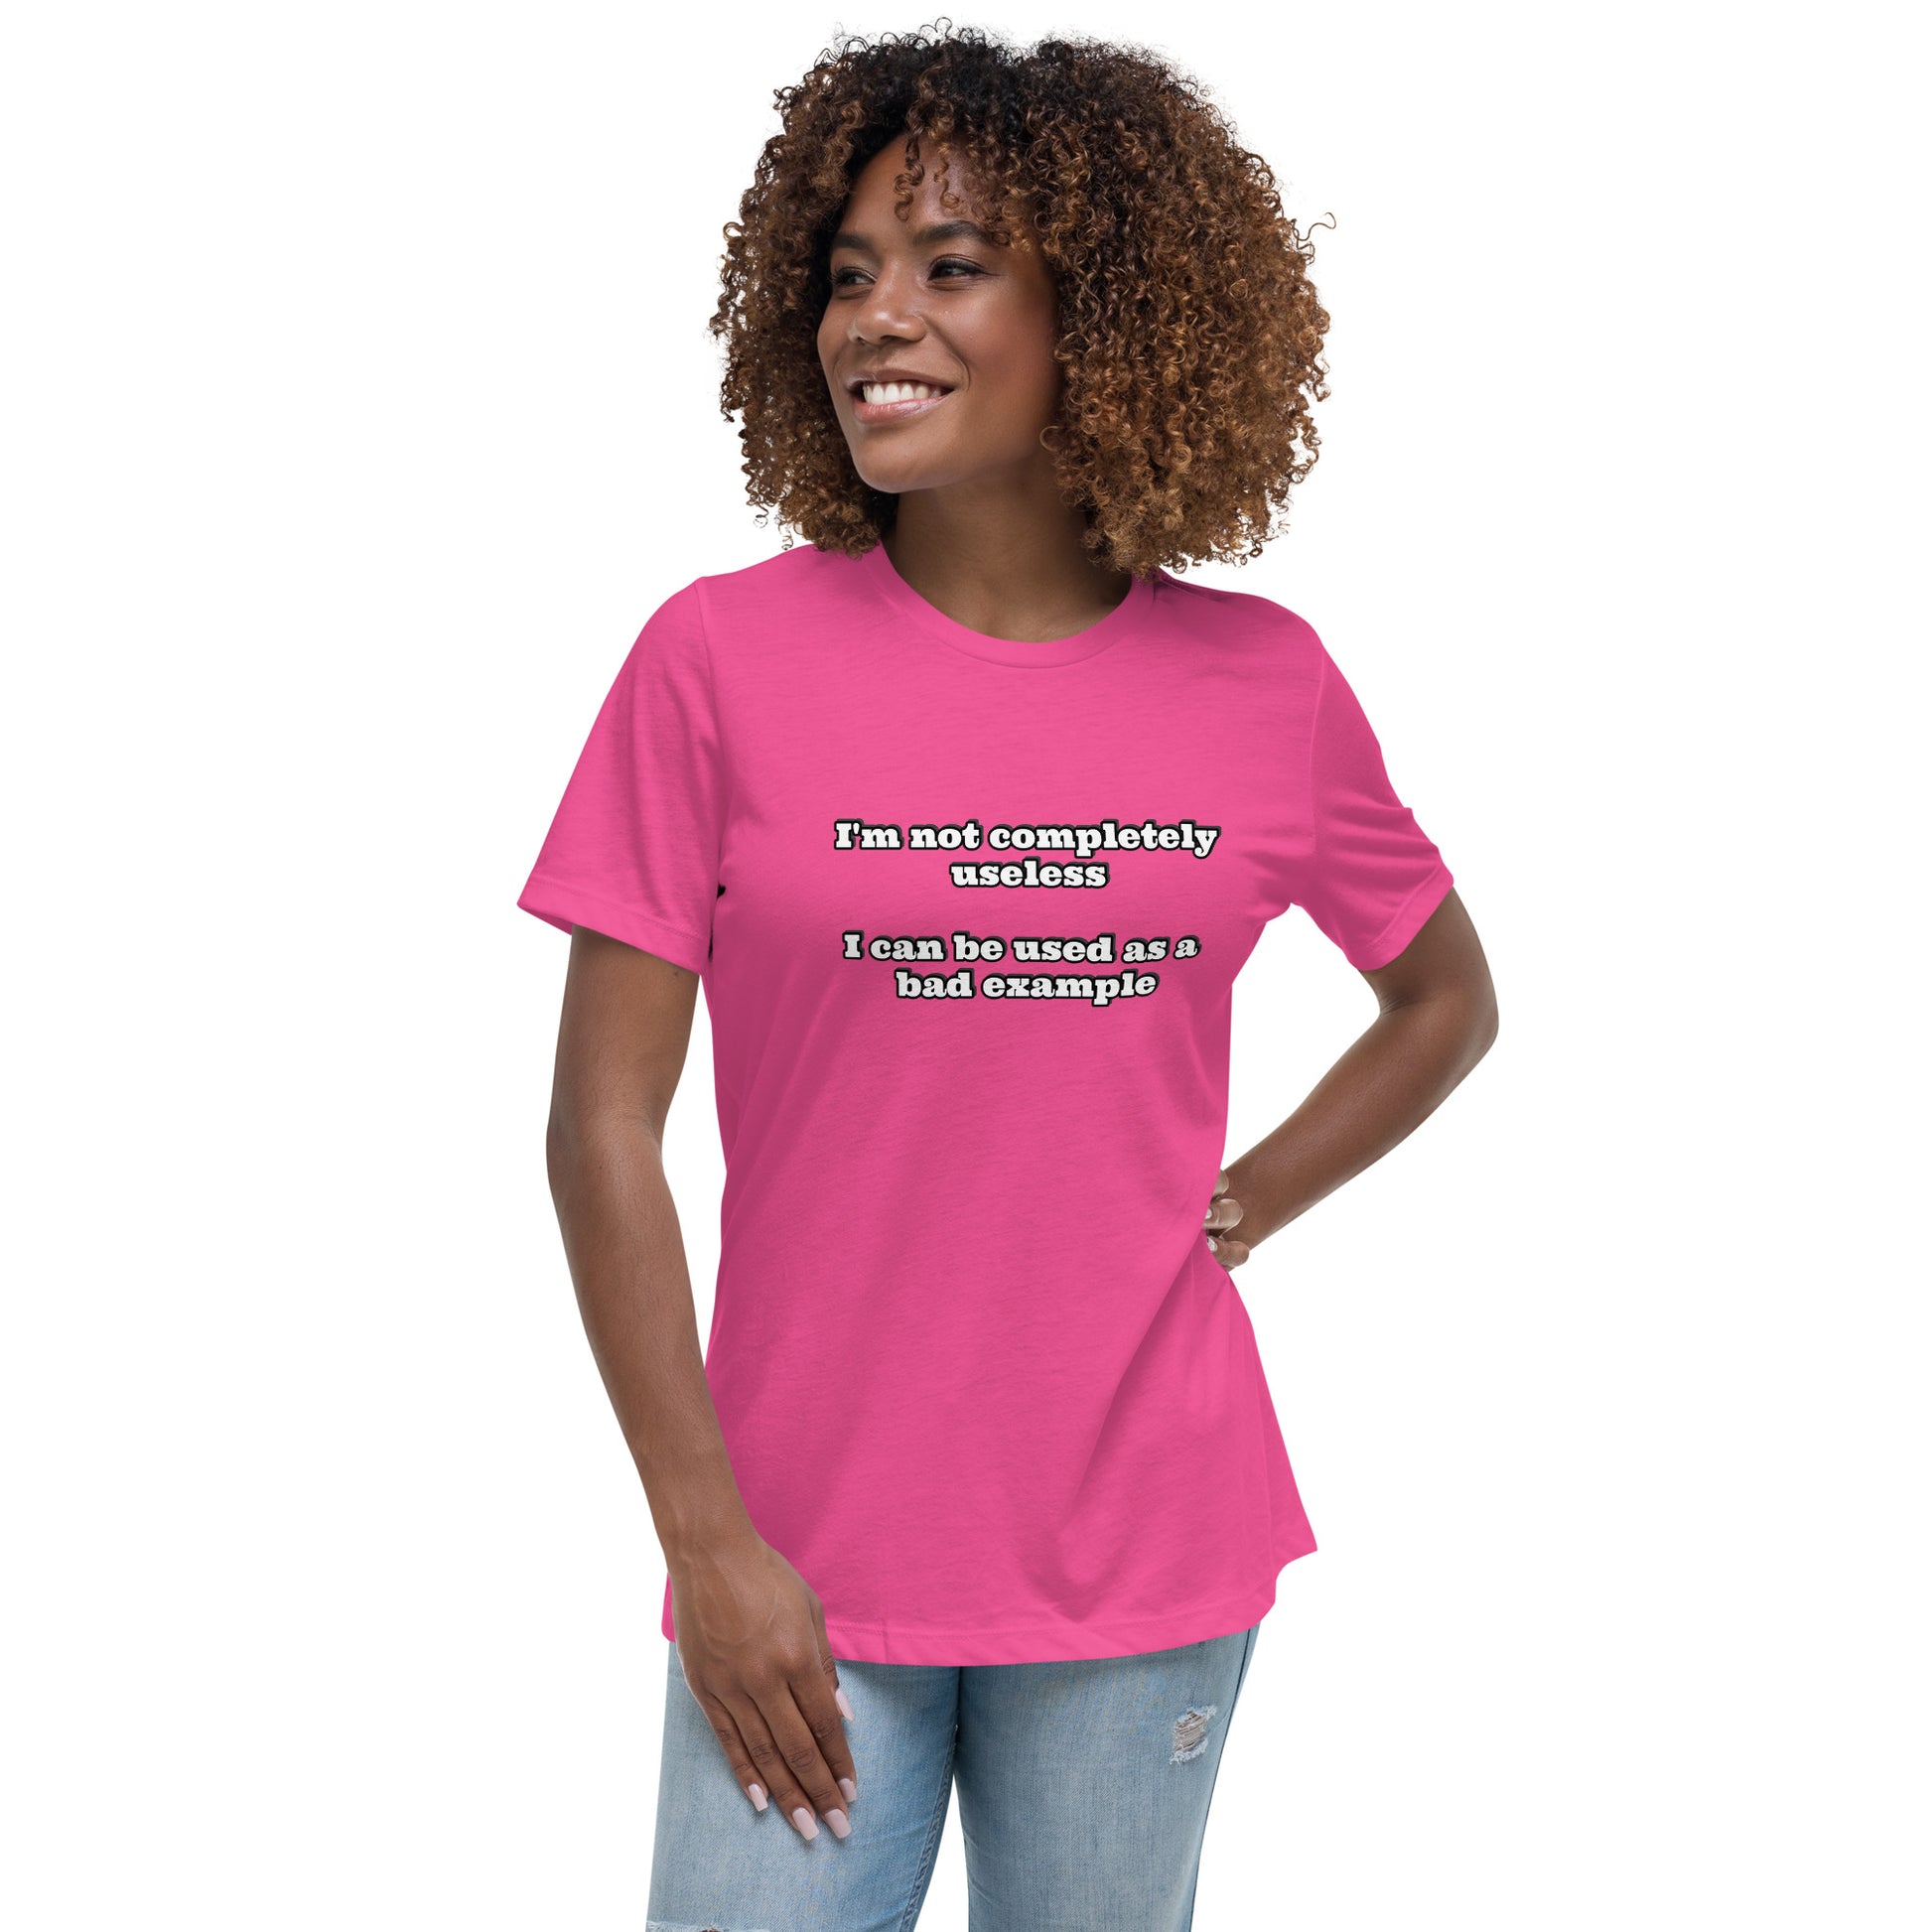 Women with berry t-shirt with text “I'm not completely useless I can be used as a bad example”